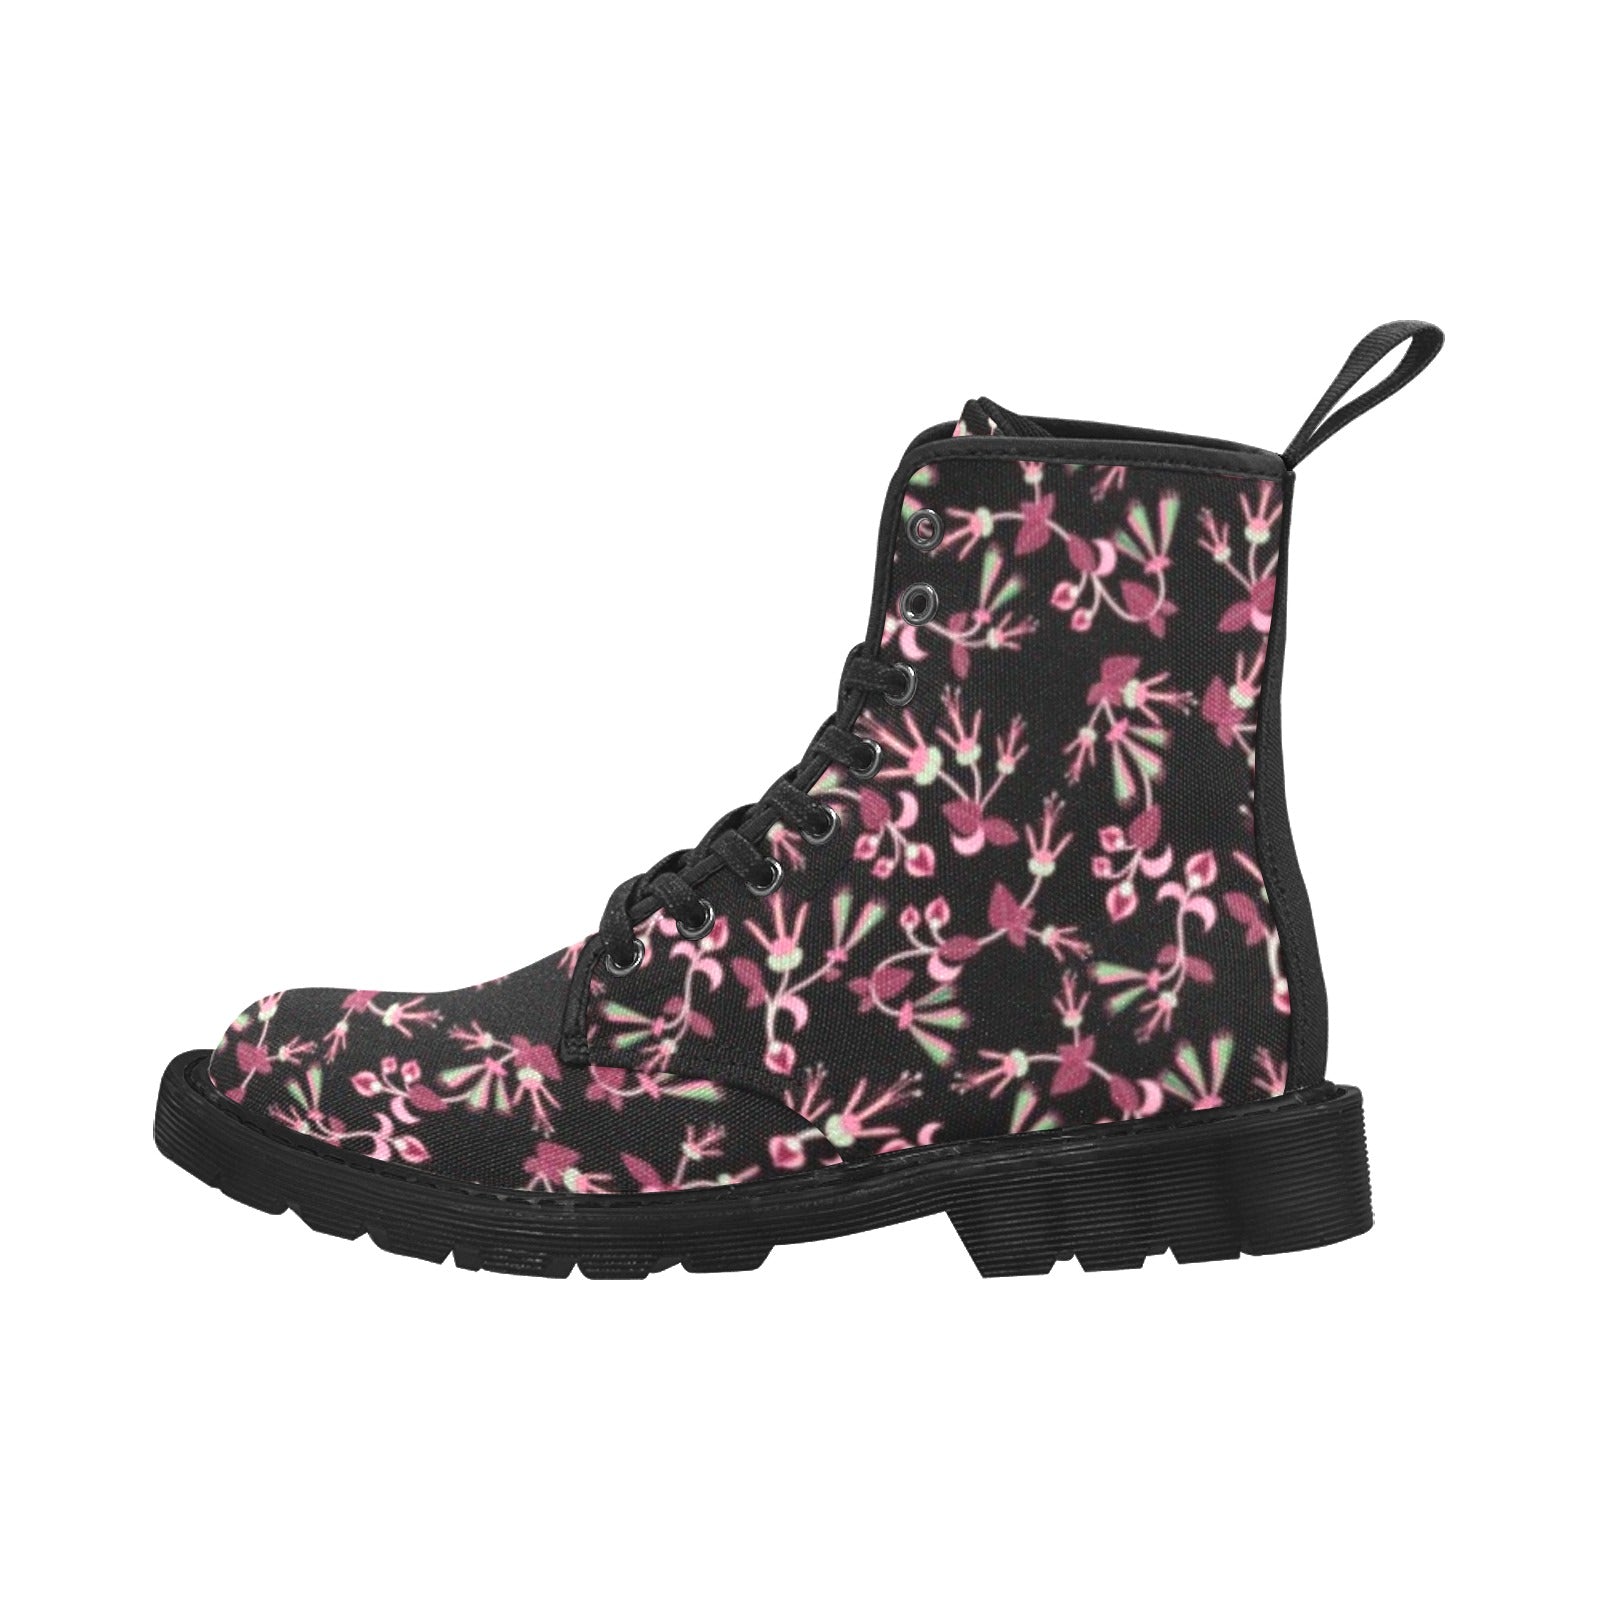 Floral Green Black Boots for Women (Black)